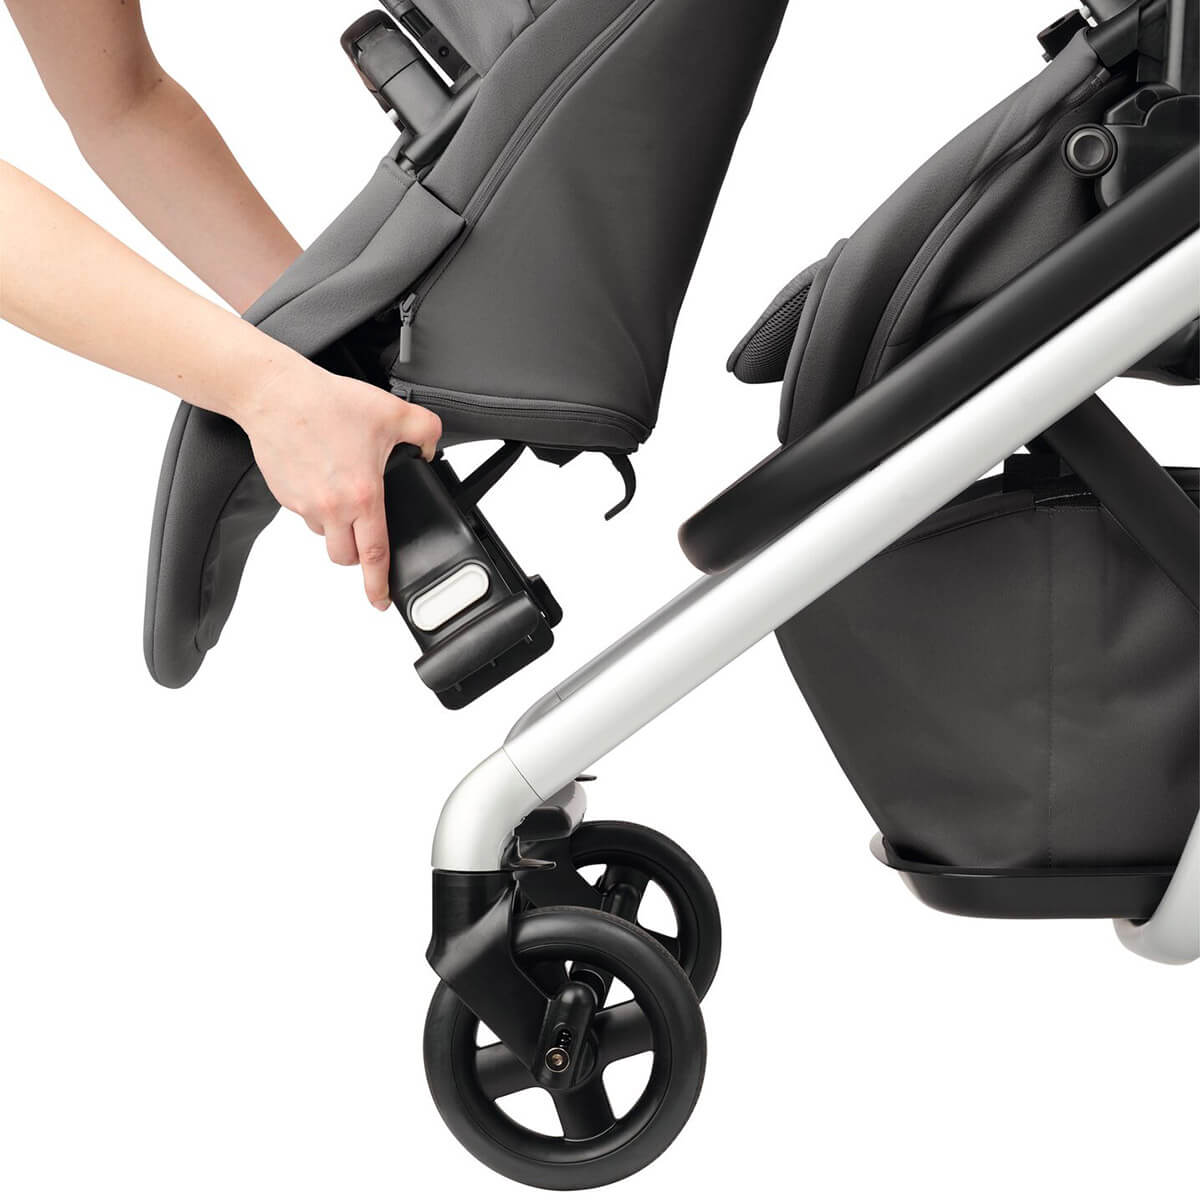 Simply slide the Maxi-Cosi Lila baby pram second child seat on the front of the stroller frame